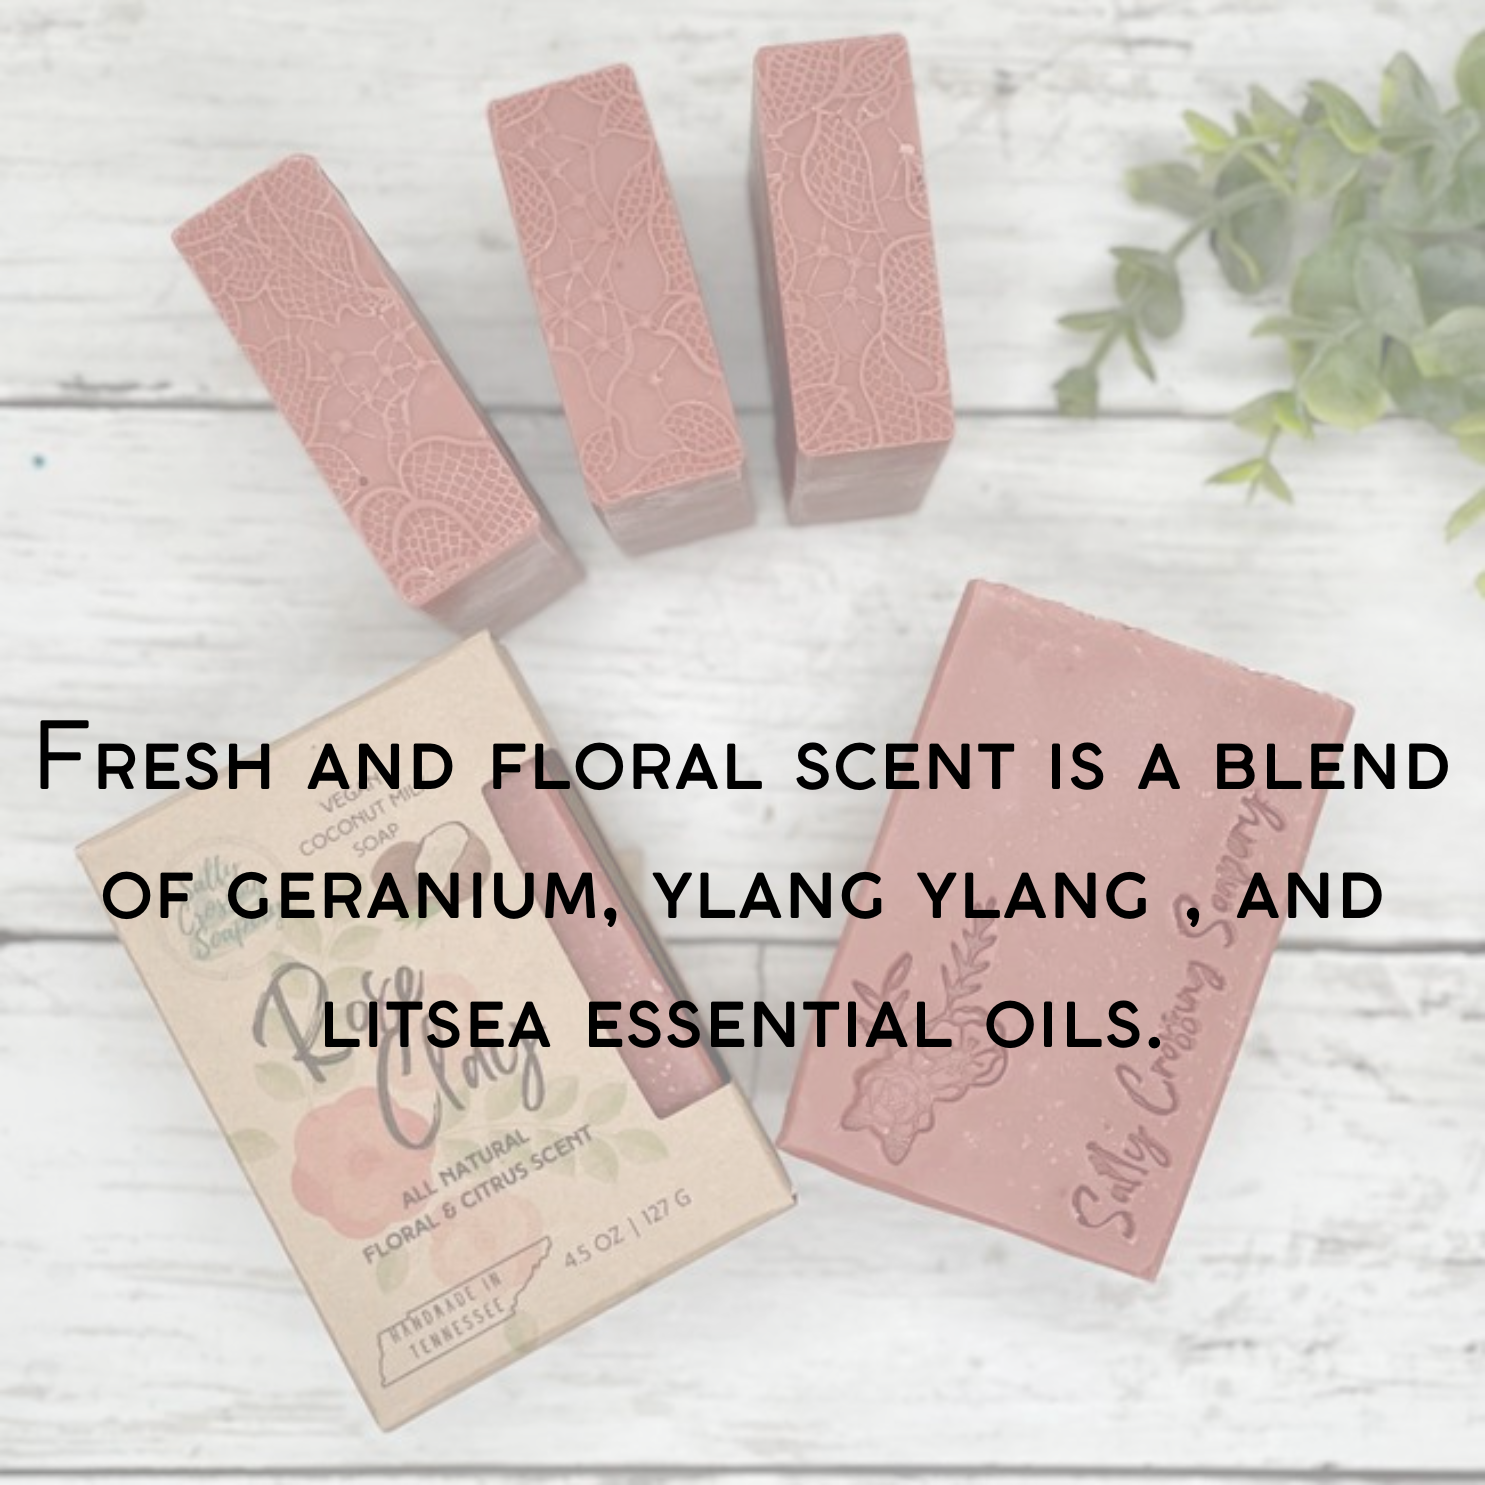 Fresh and floral scent is available blend of geranium, ylang ylang, and litsea essential oils